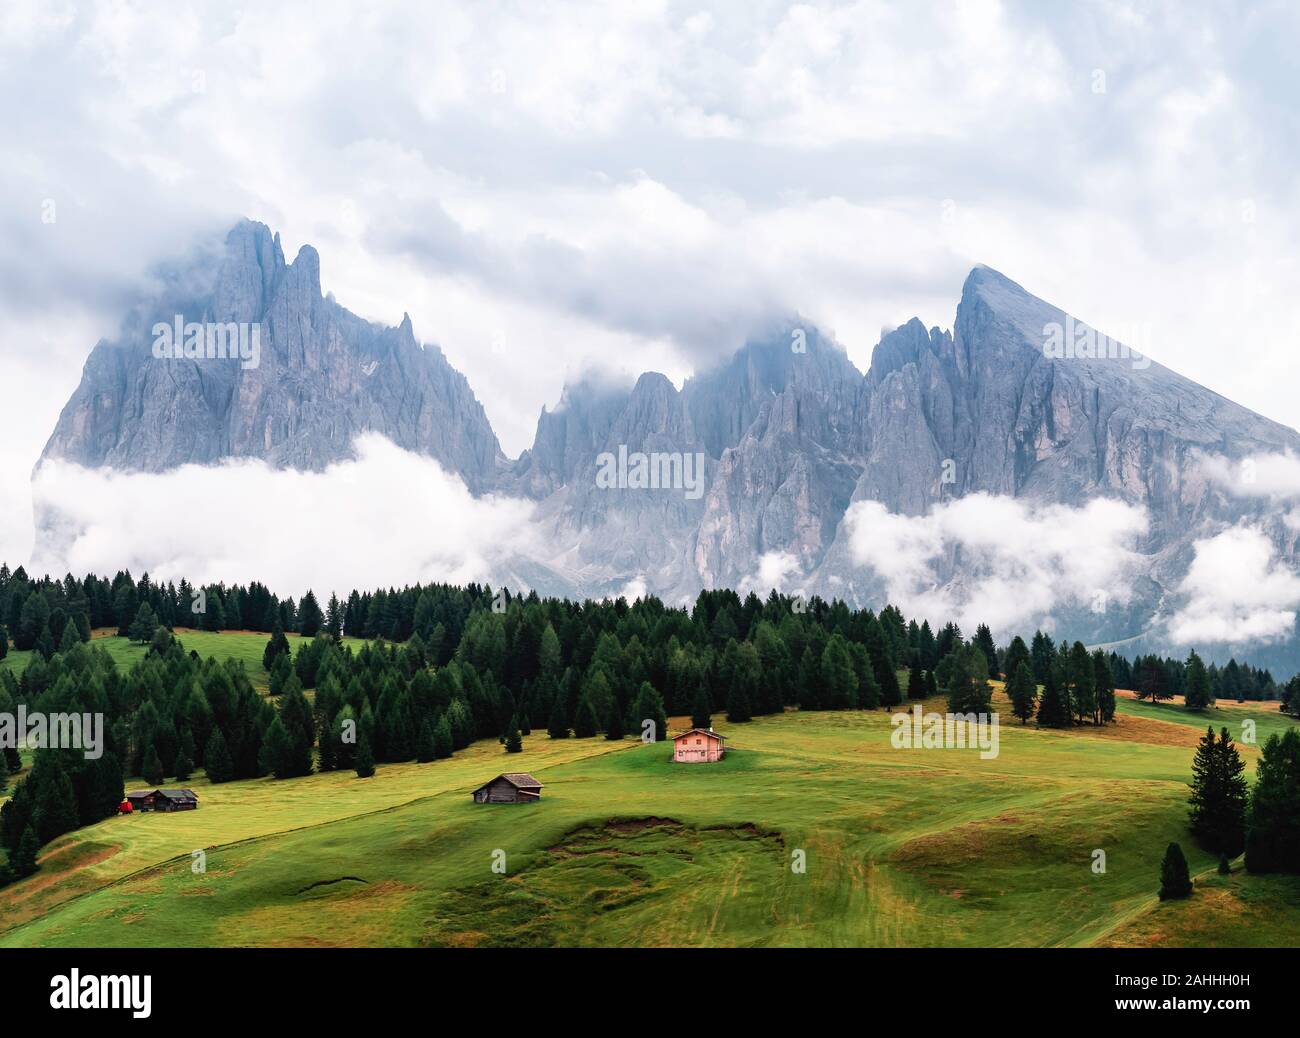 Some photos of the beautiful Seiser Alm, Sudtirol, a place famous for holidays, with its meadows, flower peaks, and topical chalets. Stock Photo